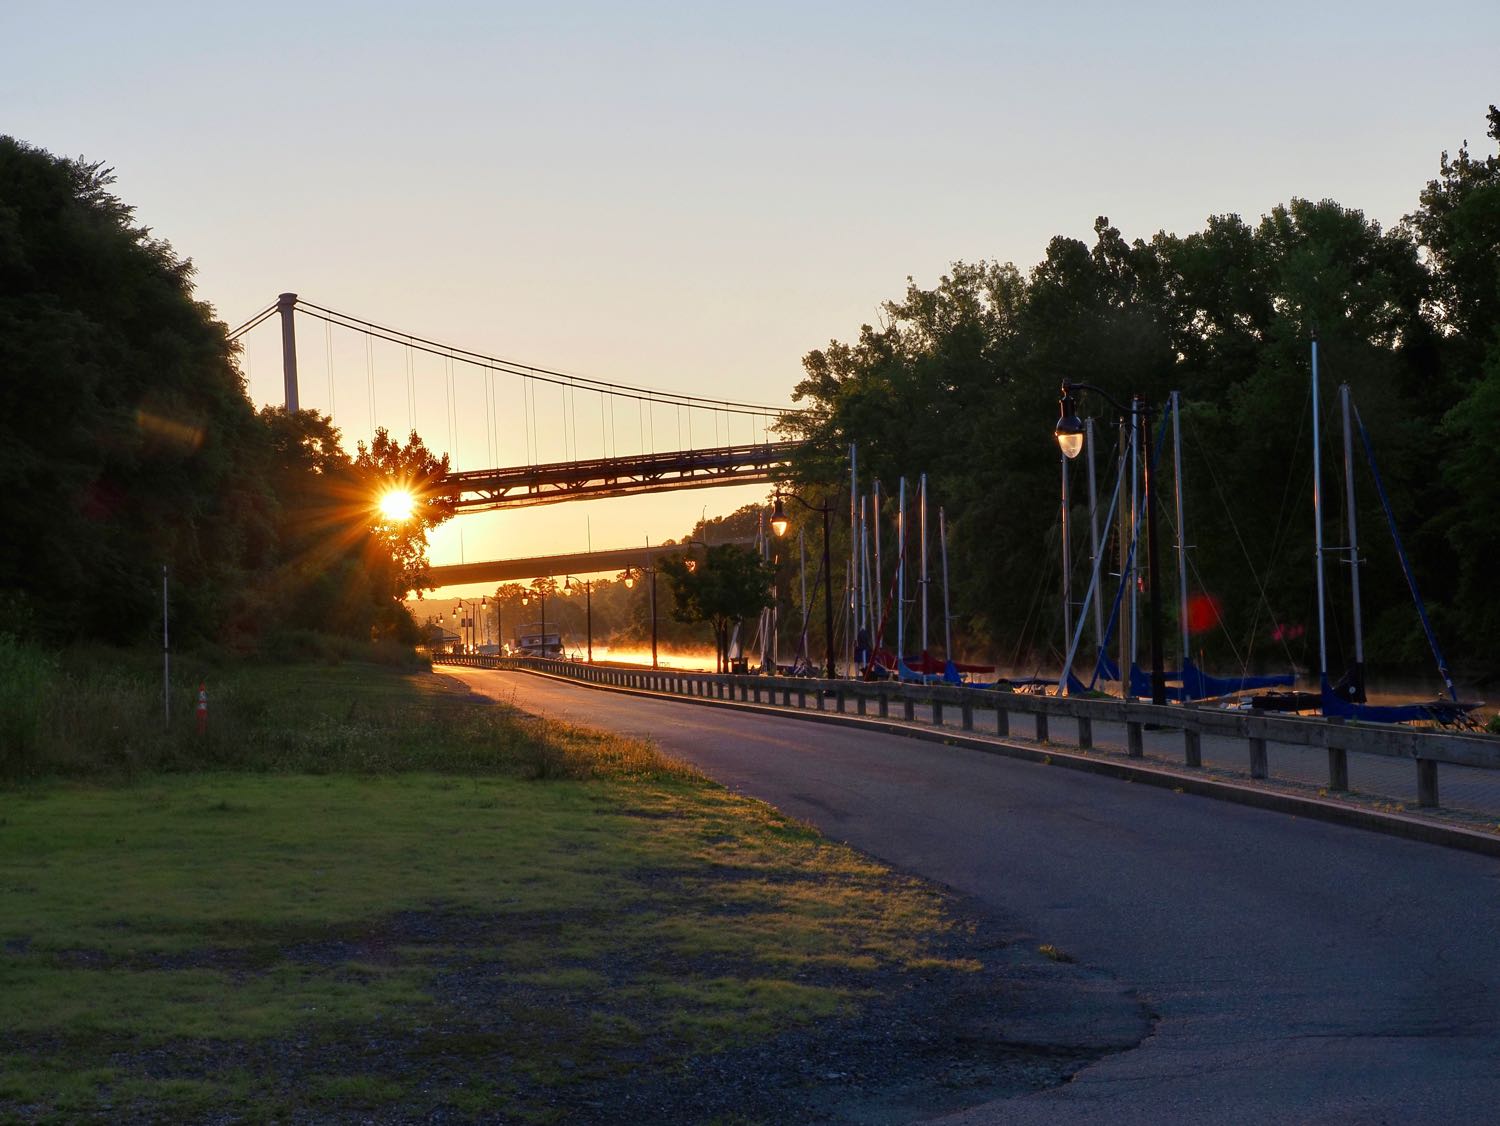 At the Rondout Creek in Kingston NY, looking east toward the sun. Two bridges in the background with a sunstar in the trees. Mist rising from the creek, and a line of sailboat masts and light poles lead toward the bridges.